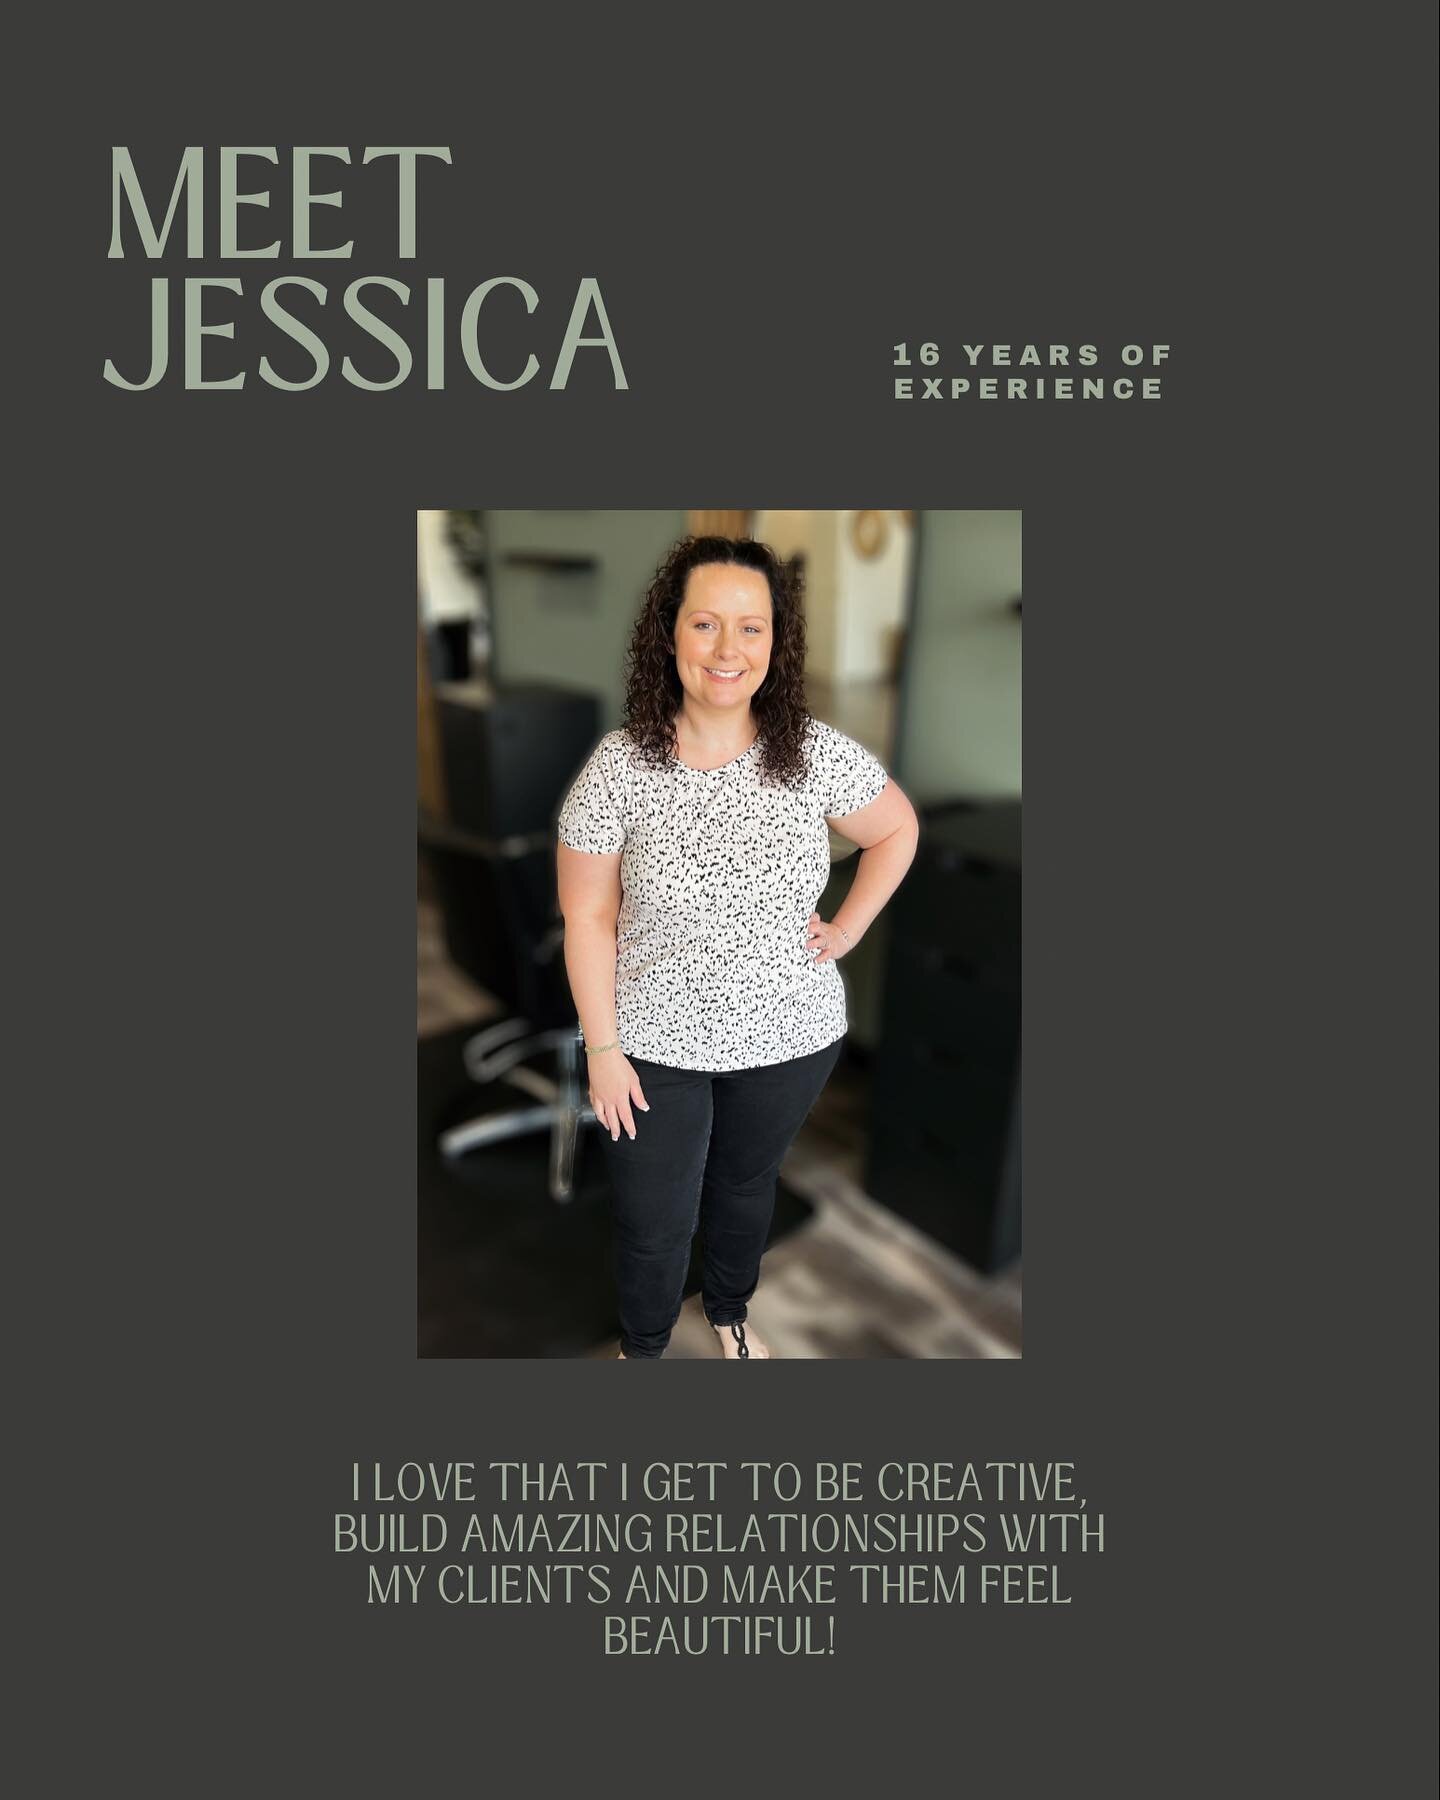 ✨MEET JESSICA✨ 

Man, our team that is coming together is really the best! Jessica is the sweetest and has already grounded my crazy a few times! 😅 so Thankful she joined the team. She&rsquo;s amazing at blonding and I can&rsquo;t wait to learn from